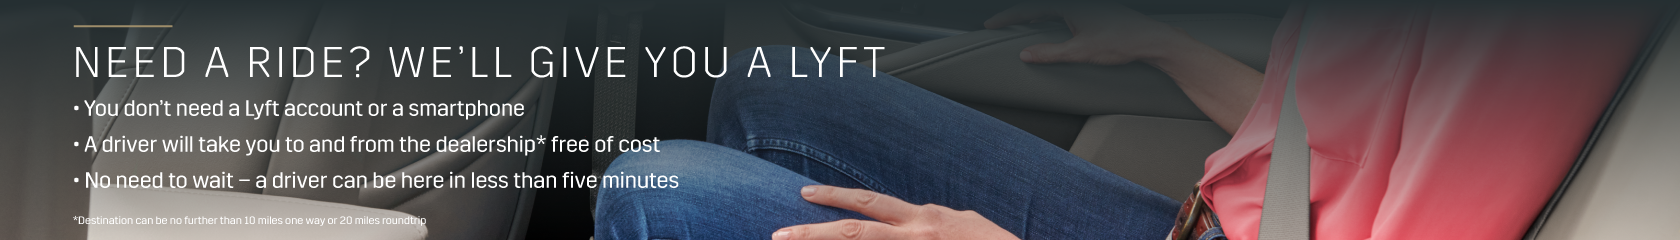 Need a Ride? We'll give you a Lyft! No need for a Lyft account or smart phone, we will arrange for a driver to take you to and from the dealership free of cost. A driver can be here in less than five minutes. Destination can be no further than 10 miles one way or 20 miles roundtrip.